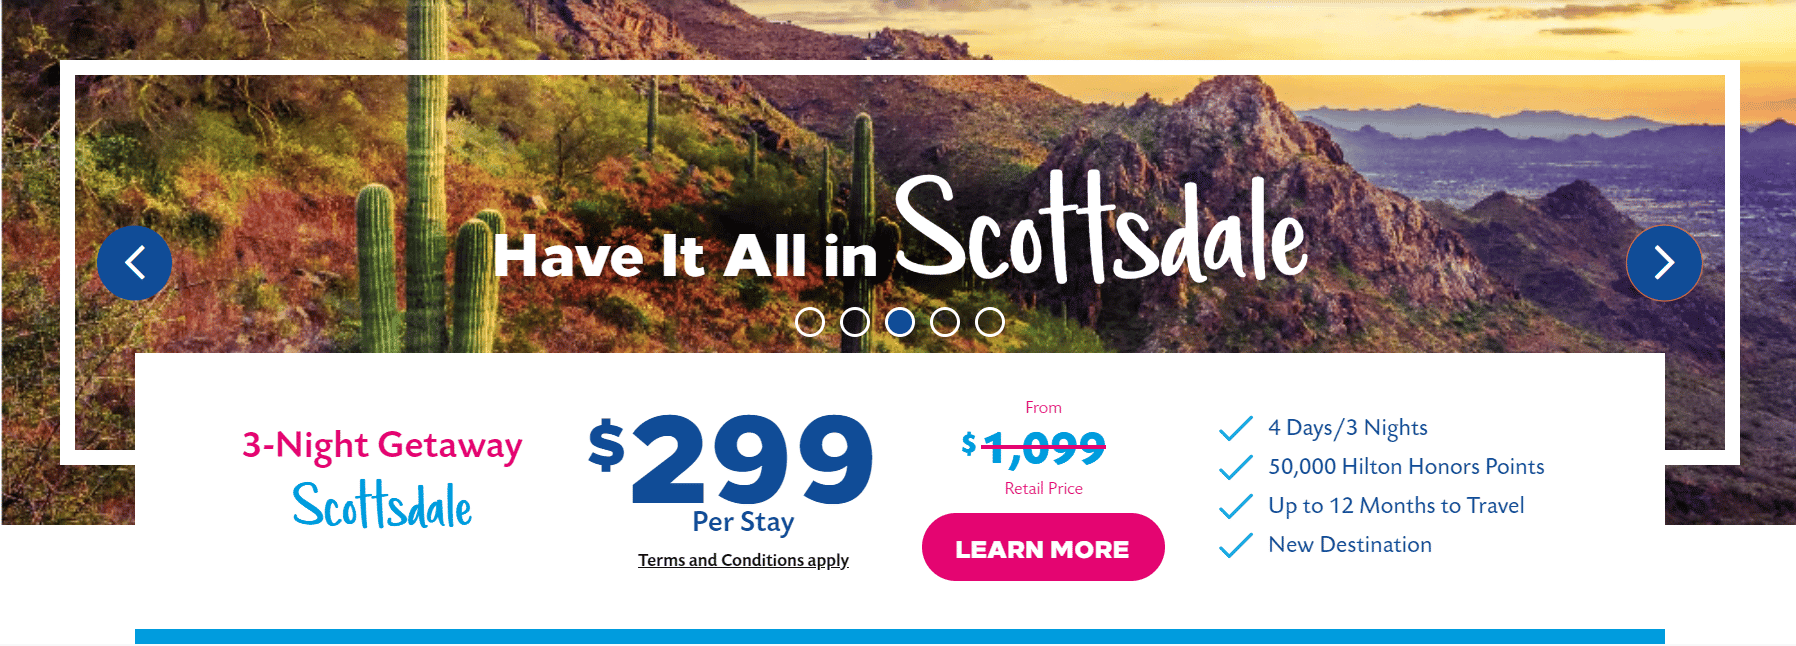 hilton grand vacations timeshare offer for scottsdale arizona